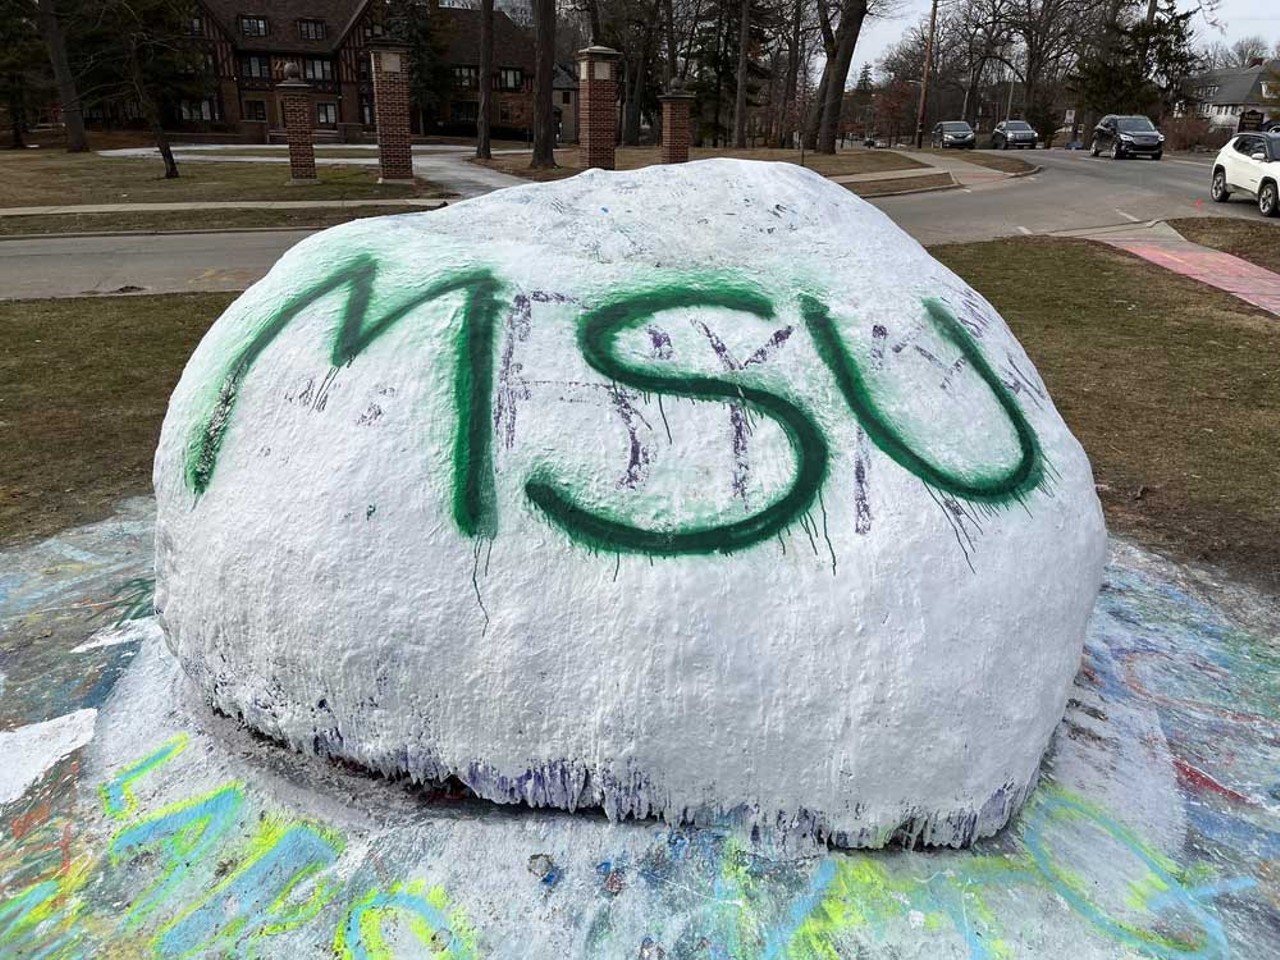 Michigan State University 
The year began with a gun massacre on campus and ended with a protracted board battle over the hiring of yet another school president. In between, the head football coach got fired after allegations of a sexual nature voiced by a woman who counsels athletes against rape. All this amid residual shockwaves resulting from the serial sexual molestations of Dr. Larry Nassar.